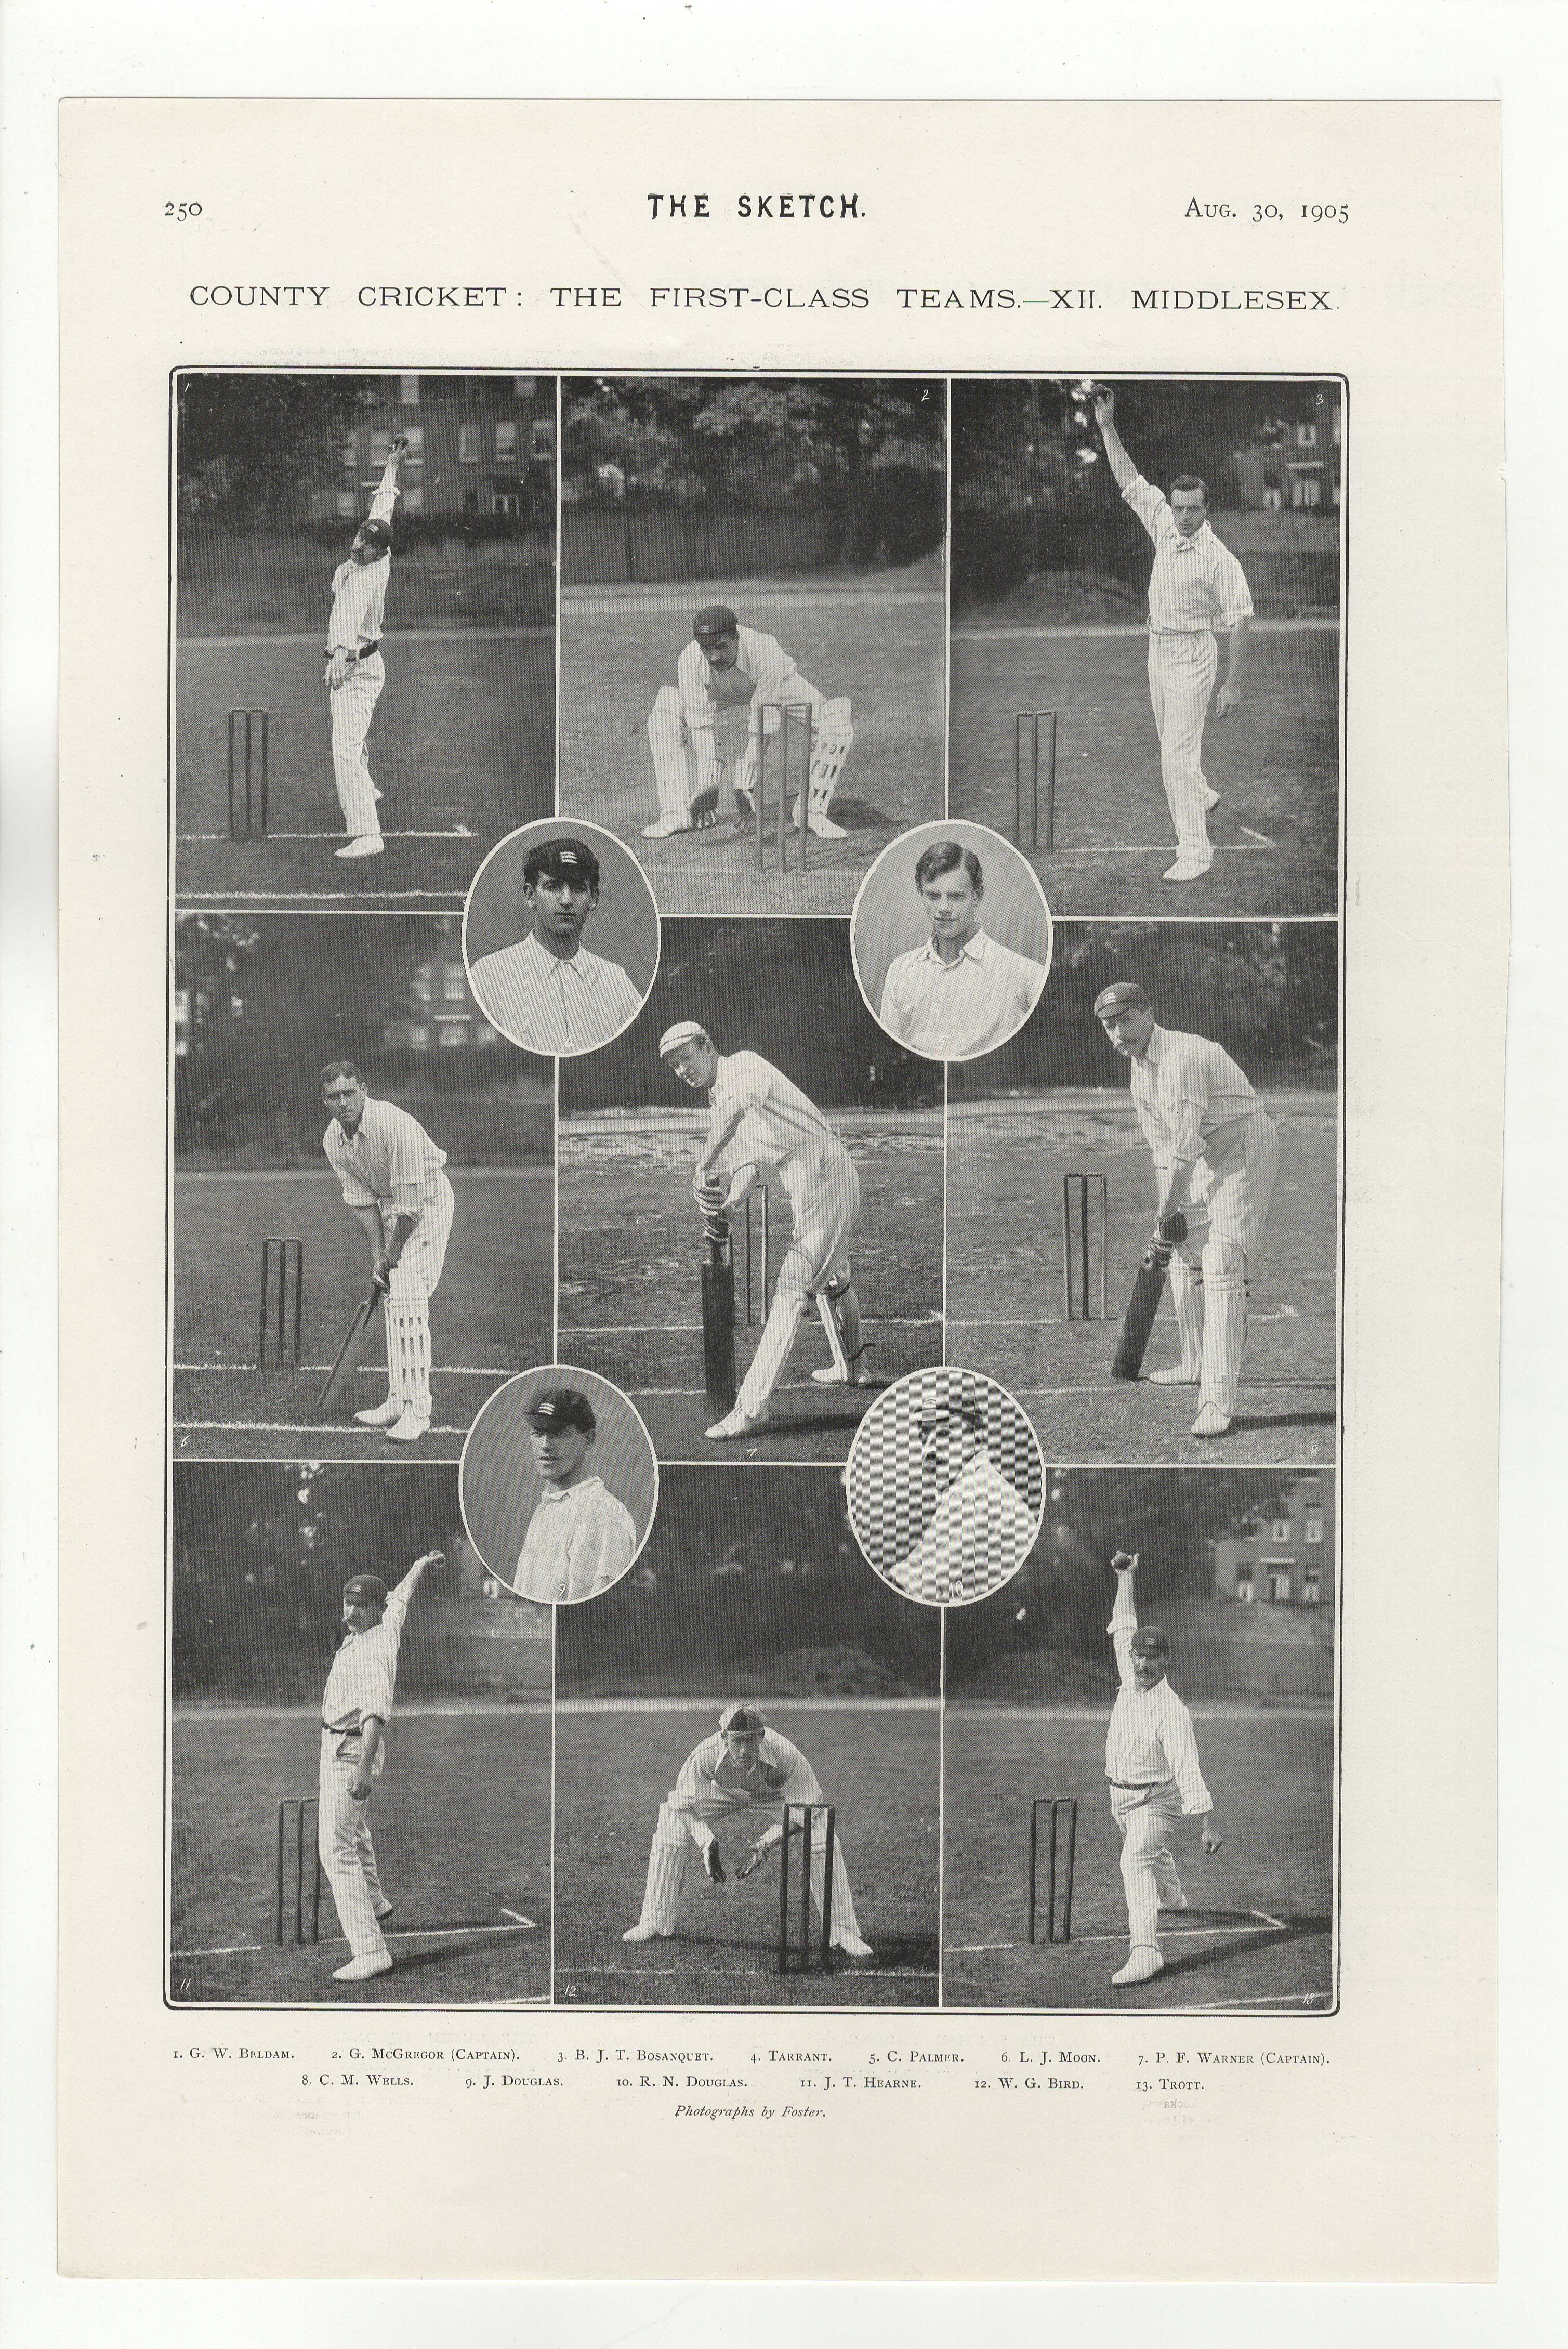 Cricket-Middlesex County First Class Team 1905-Photograph by Foster-full page -very fine-9.1/2" x